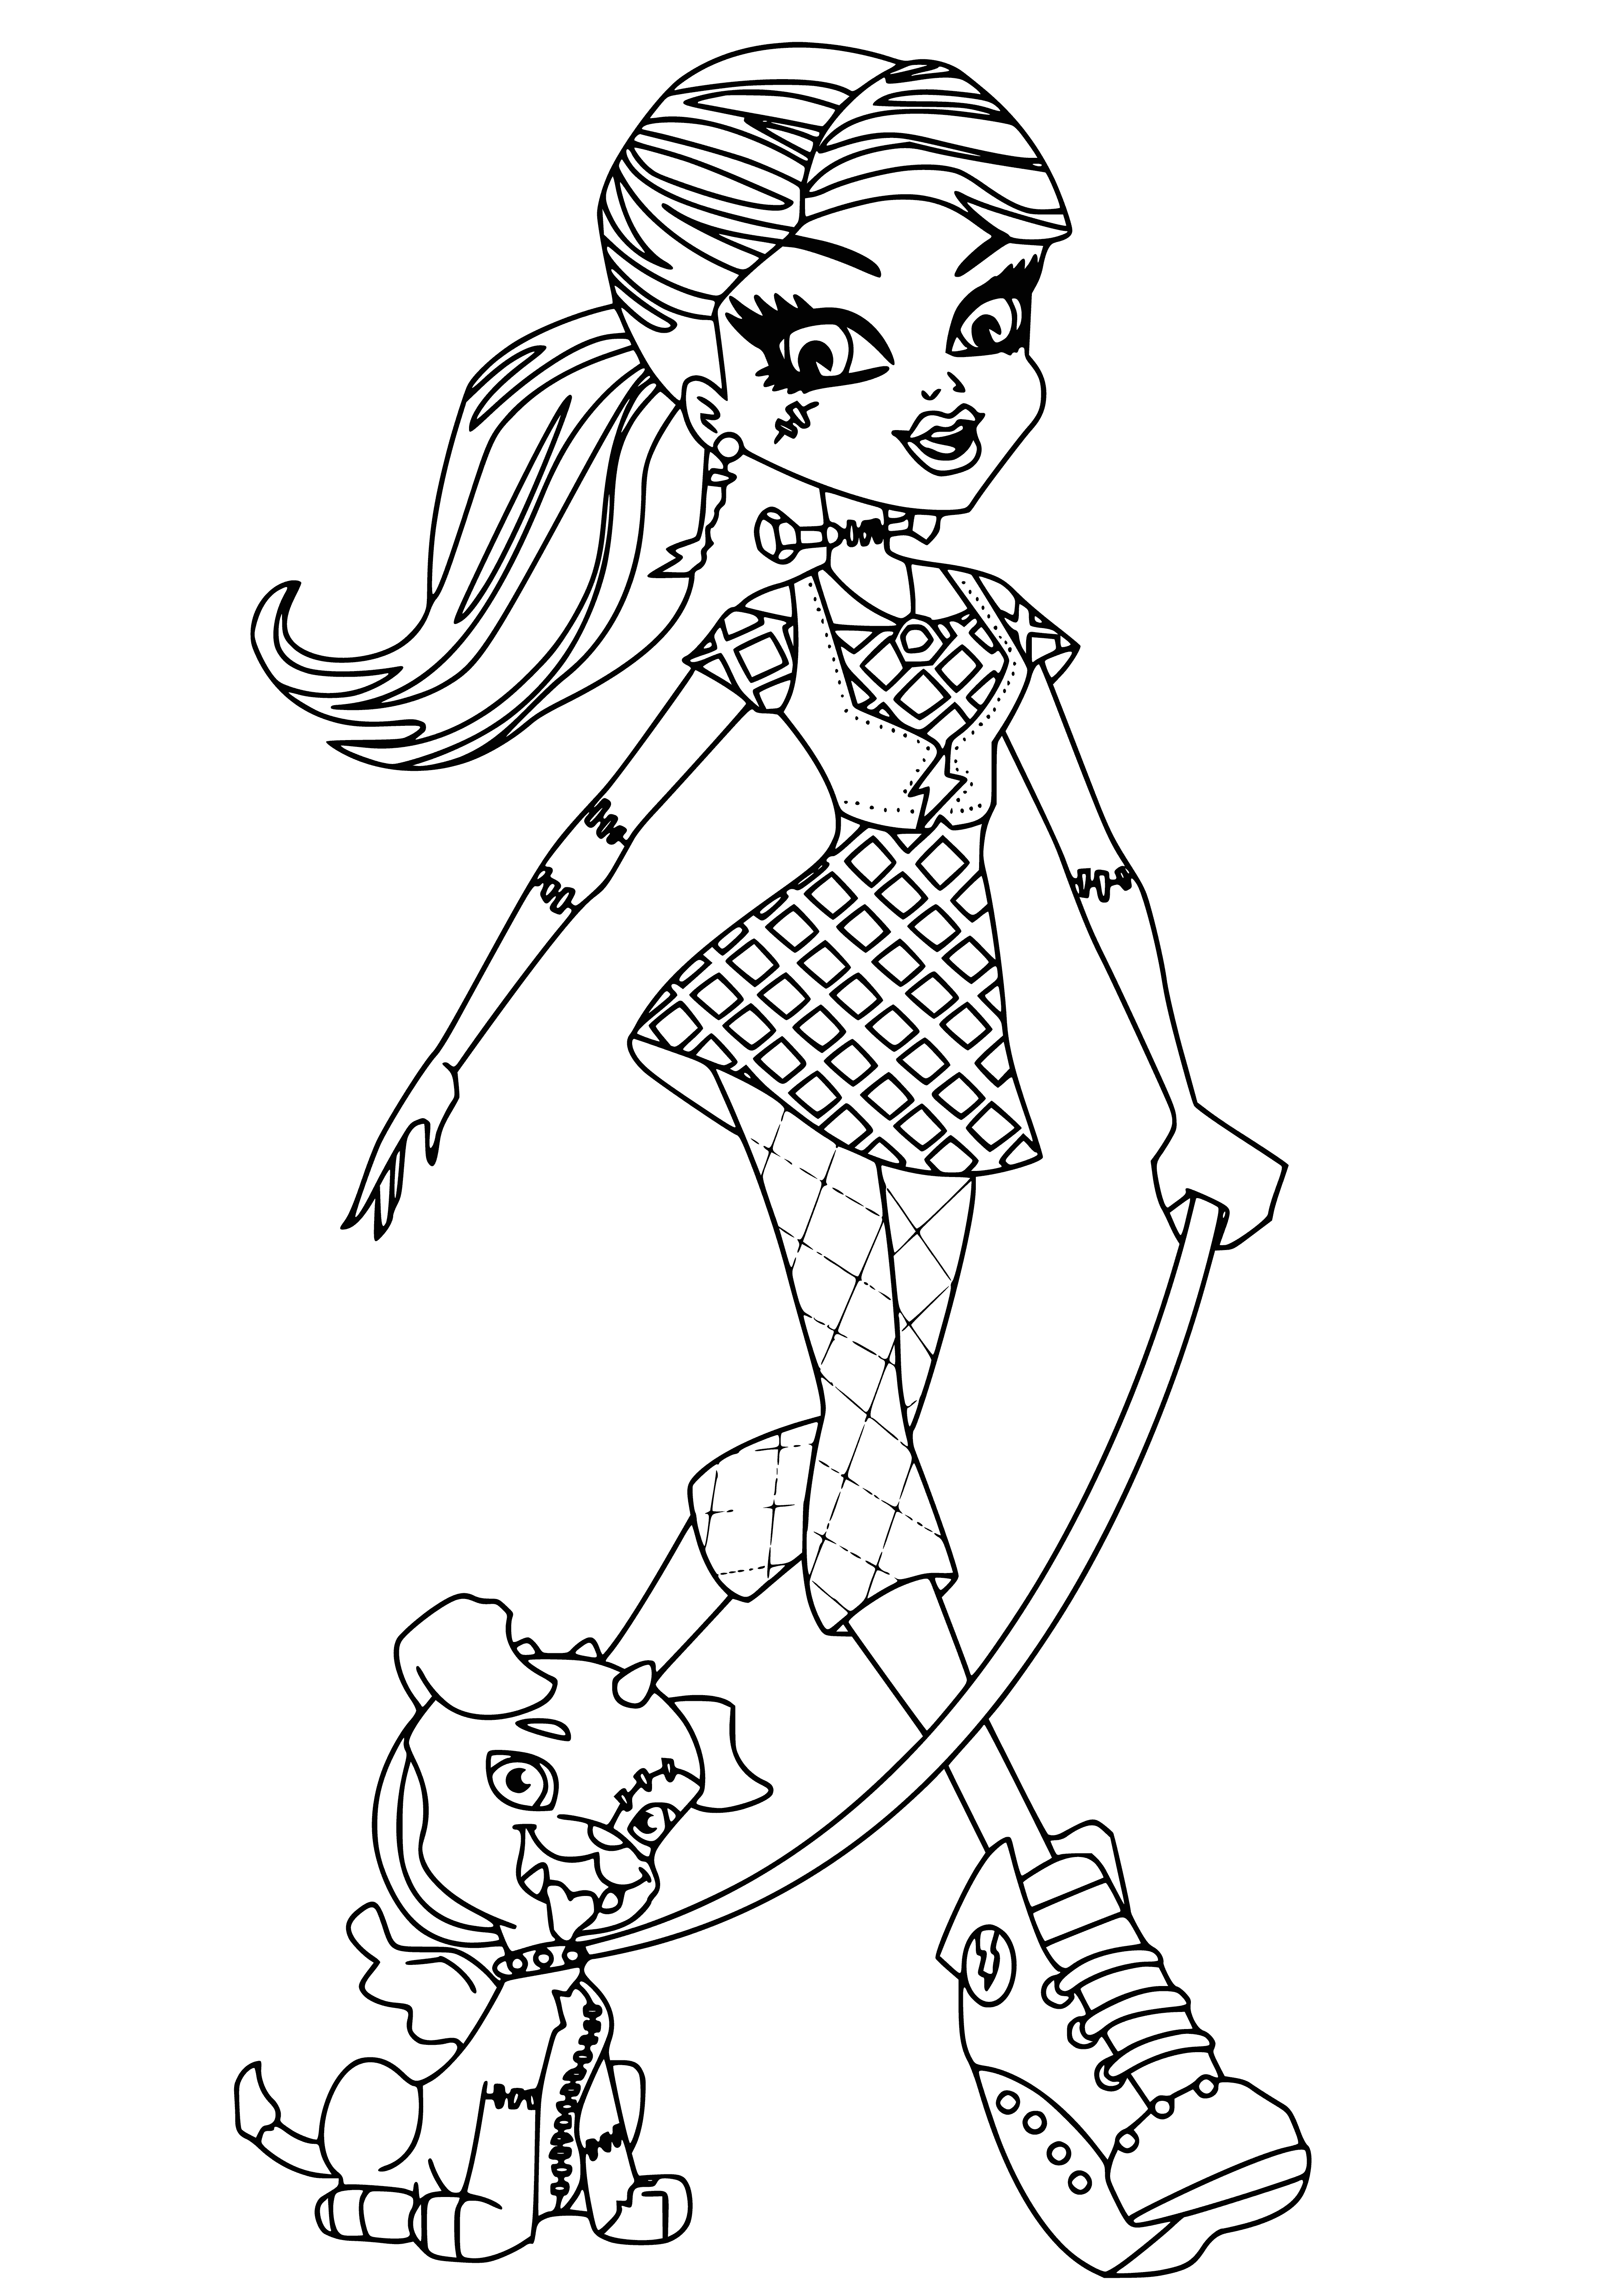 Frankie Stein and Watsit the pet coloring page